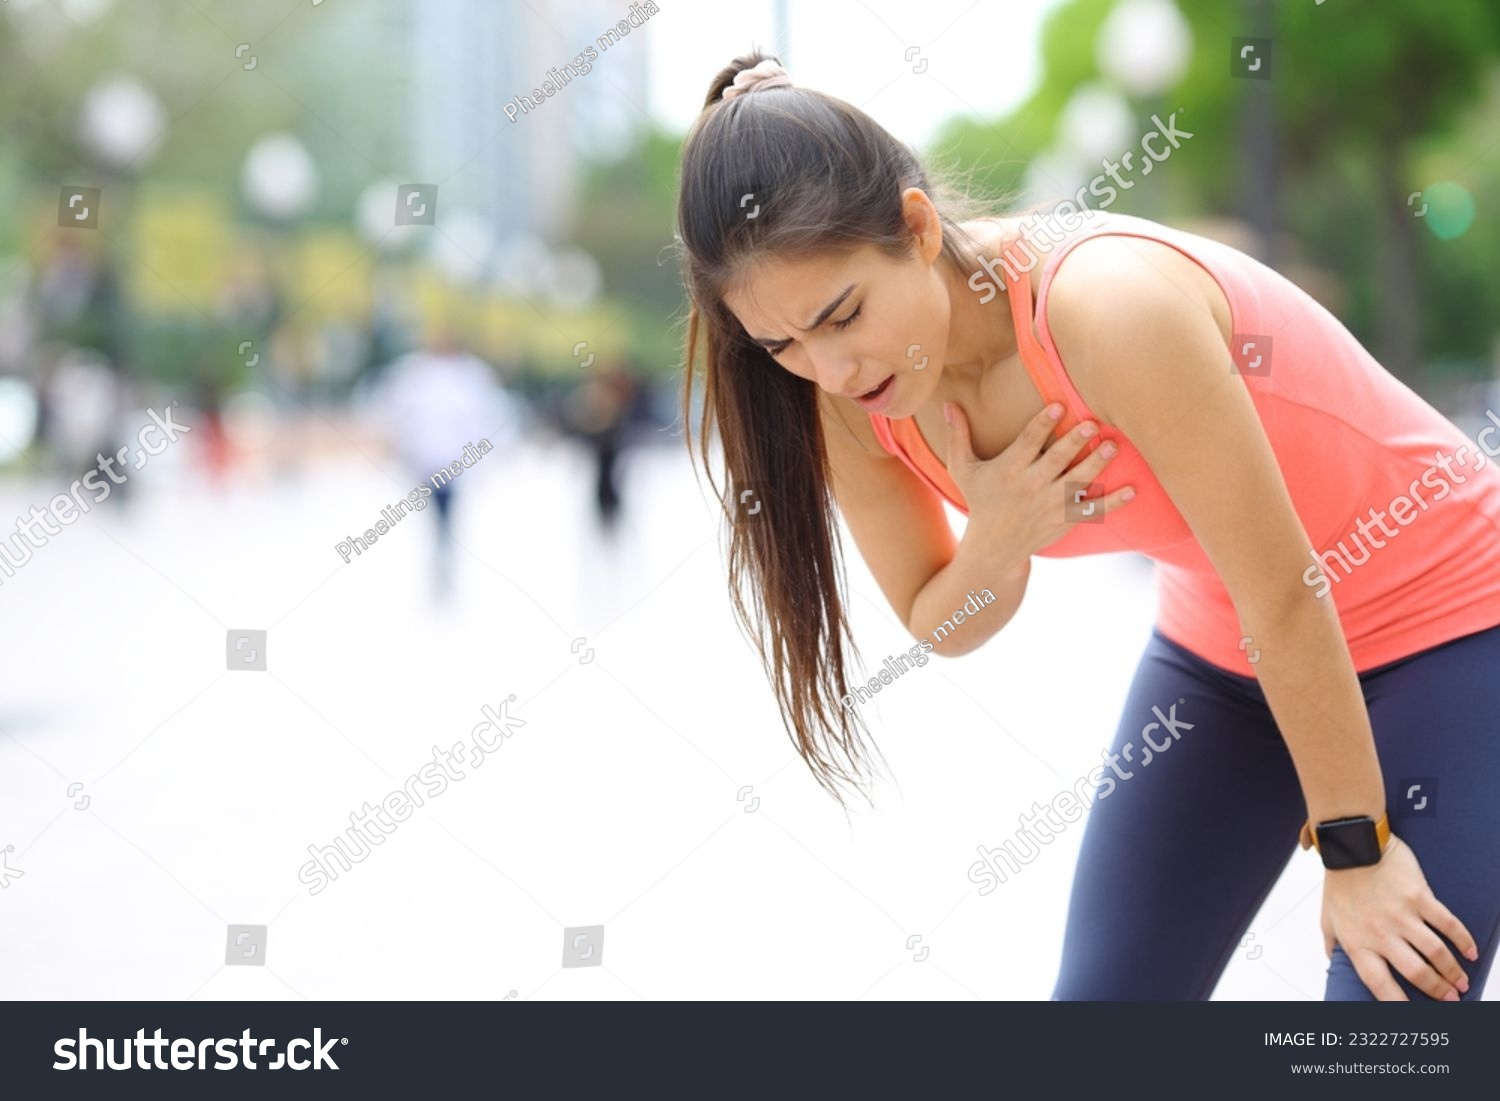 Exhausted runner touching chest breathing in the street #2322727595